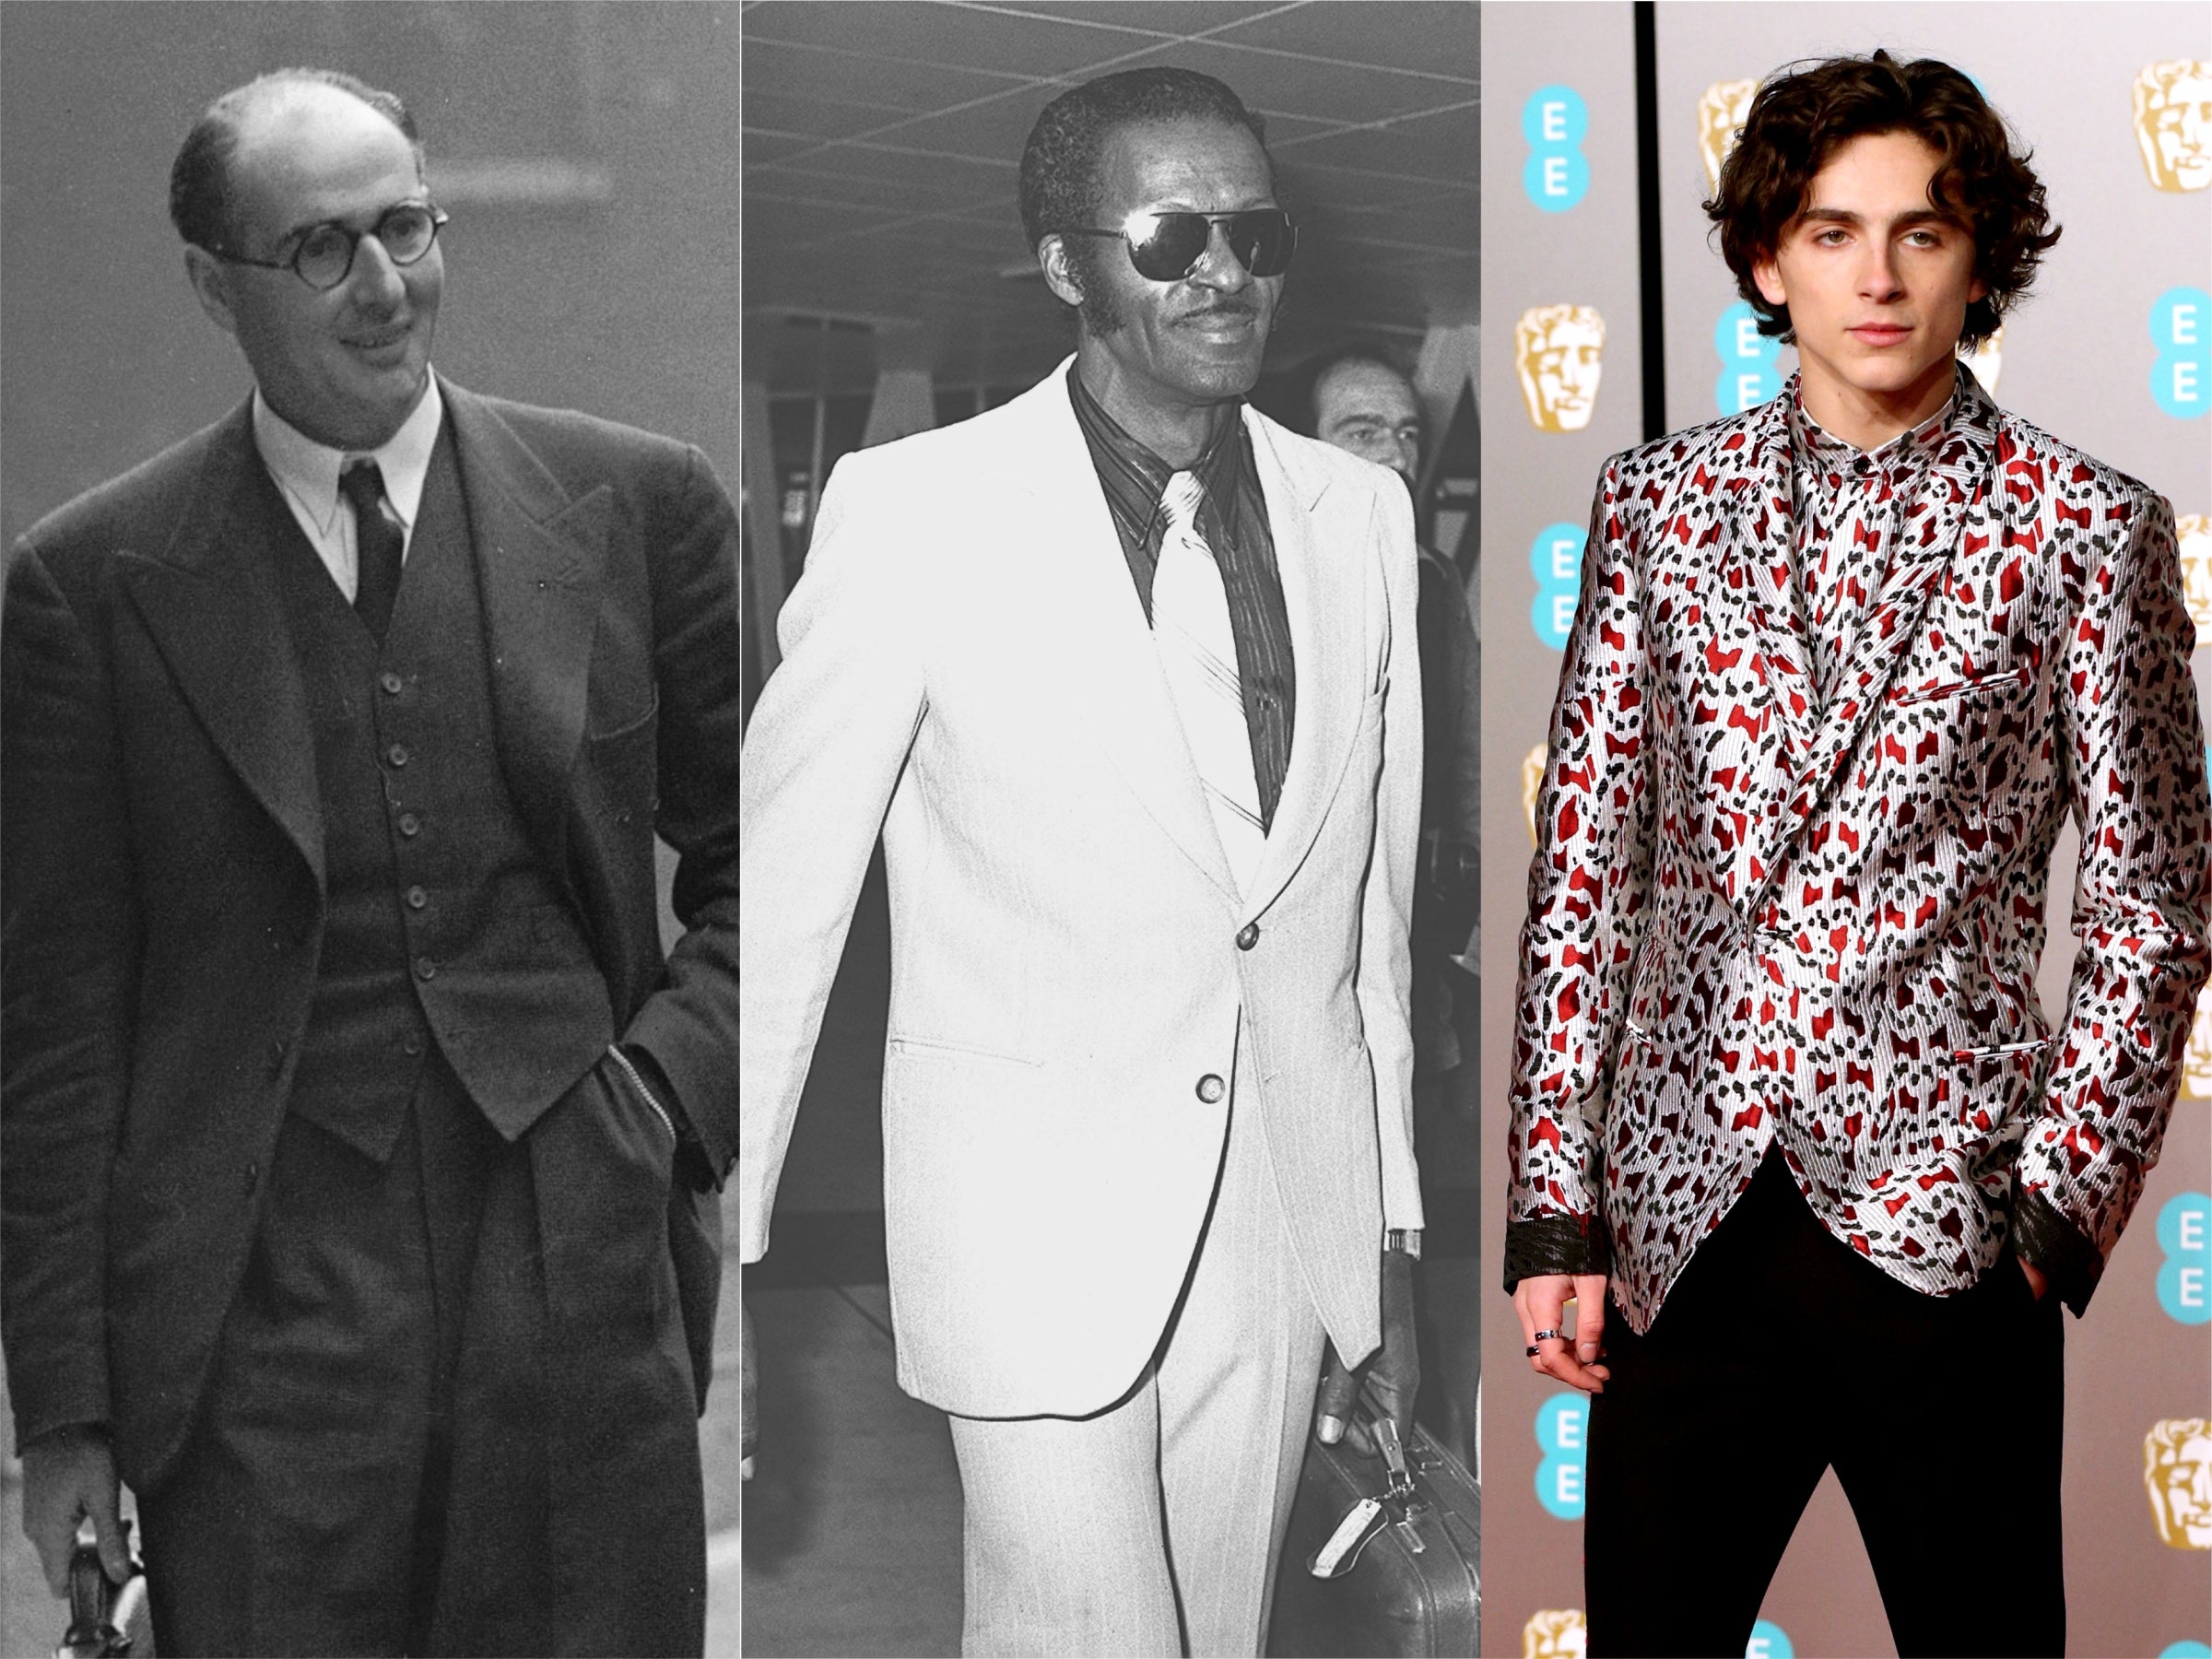 The evolution of the men's suit